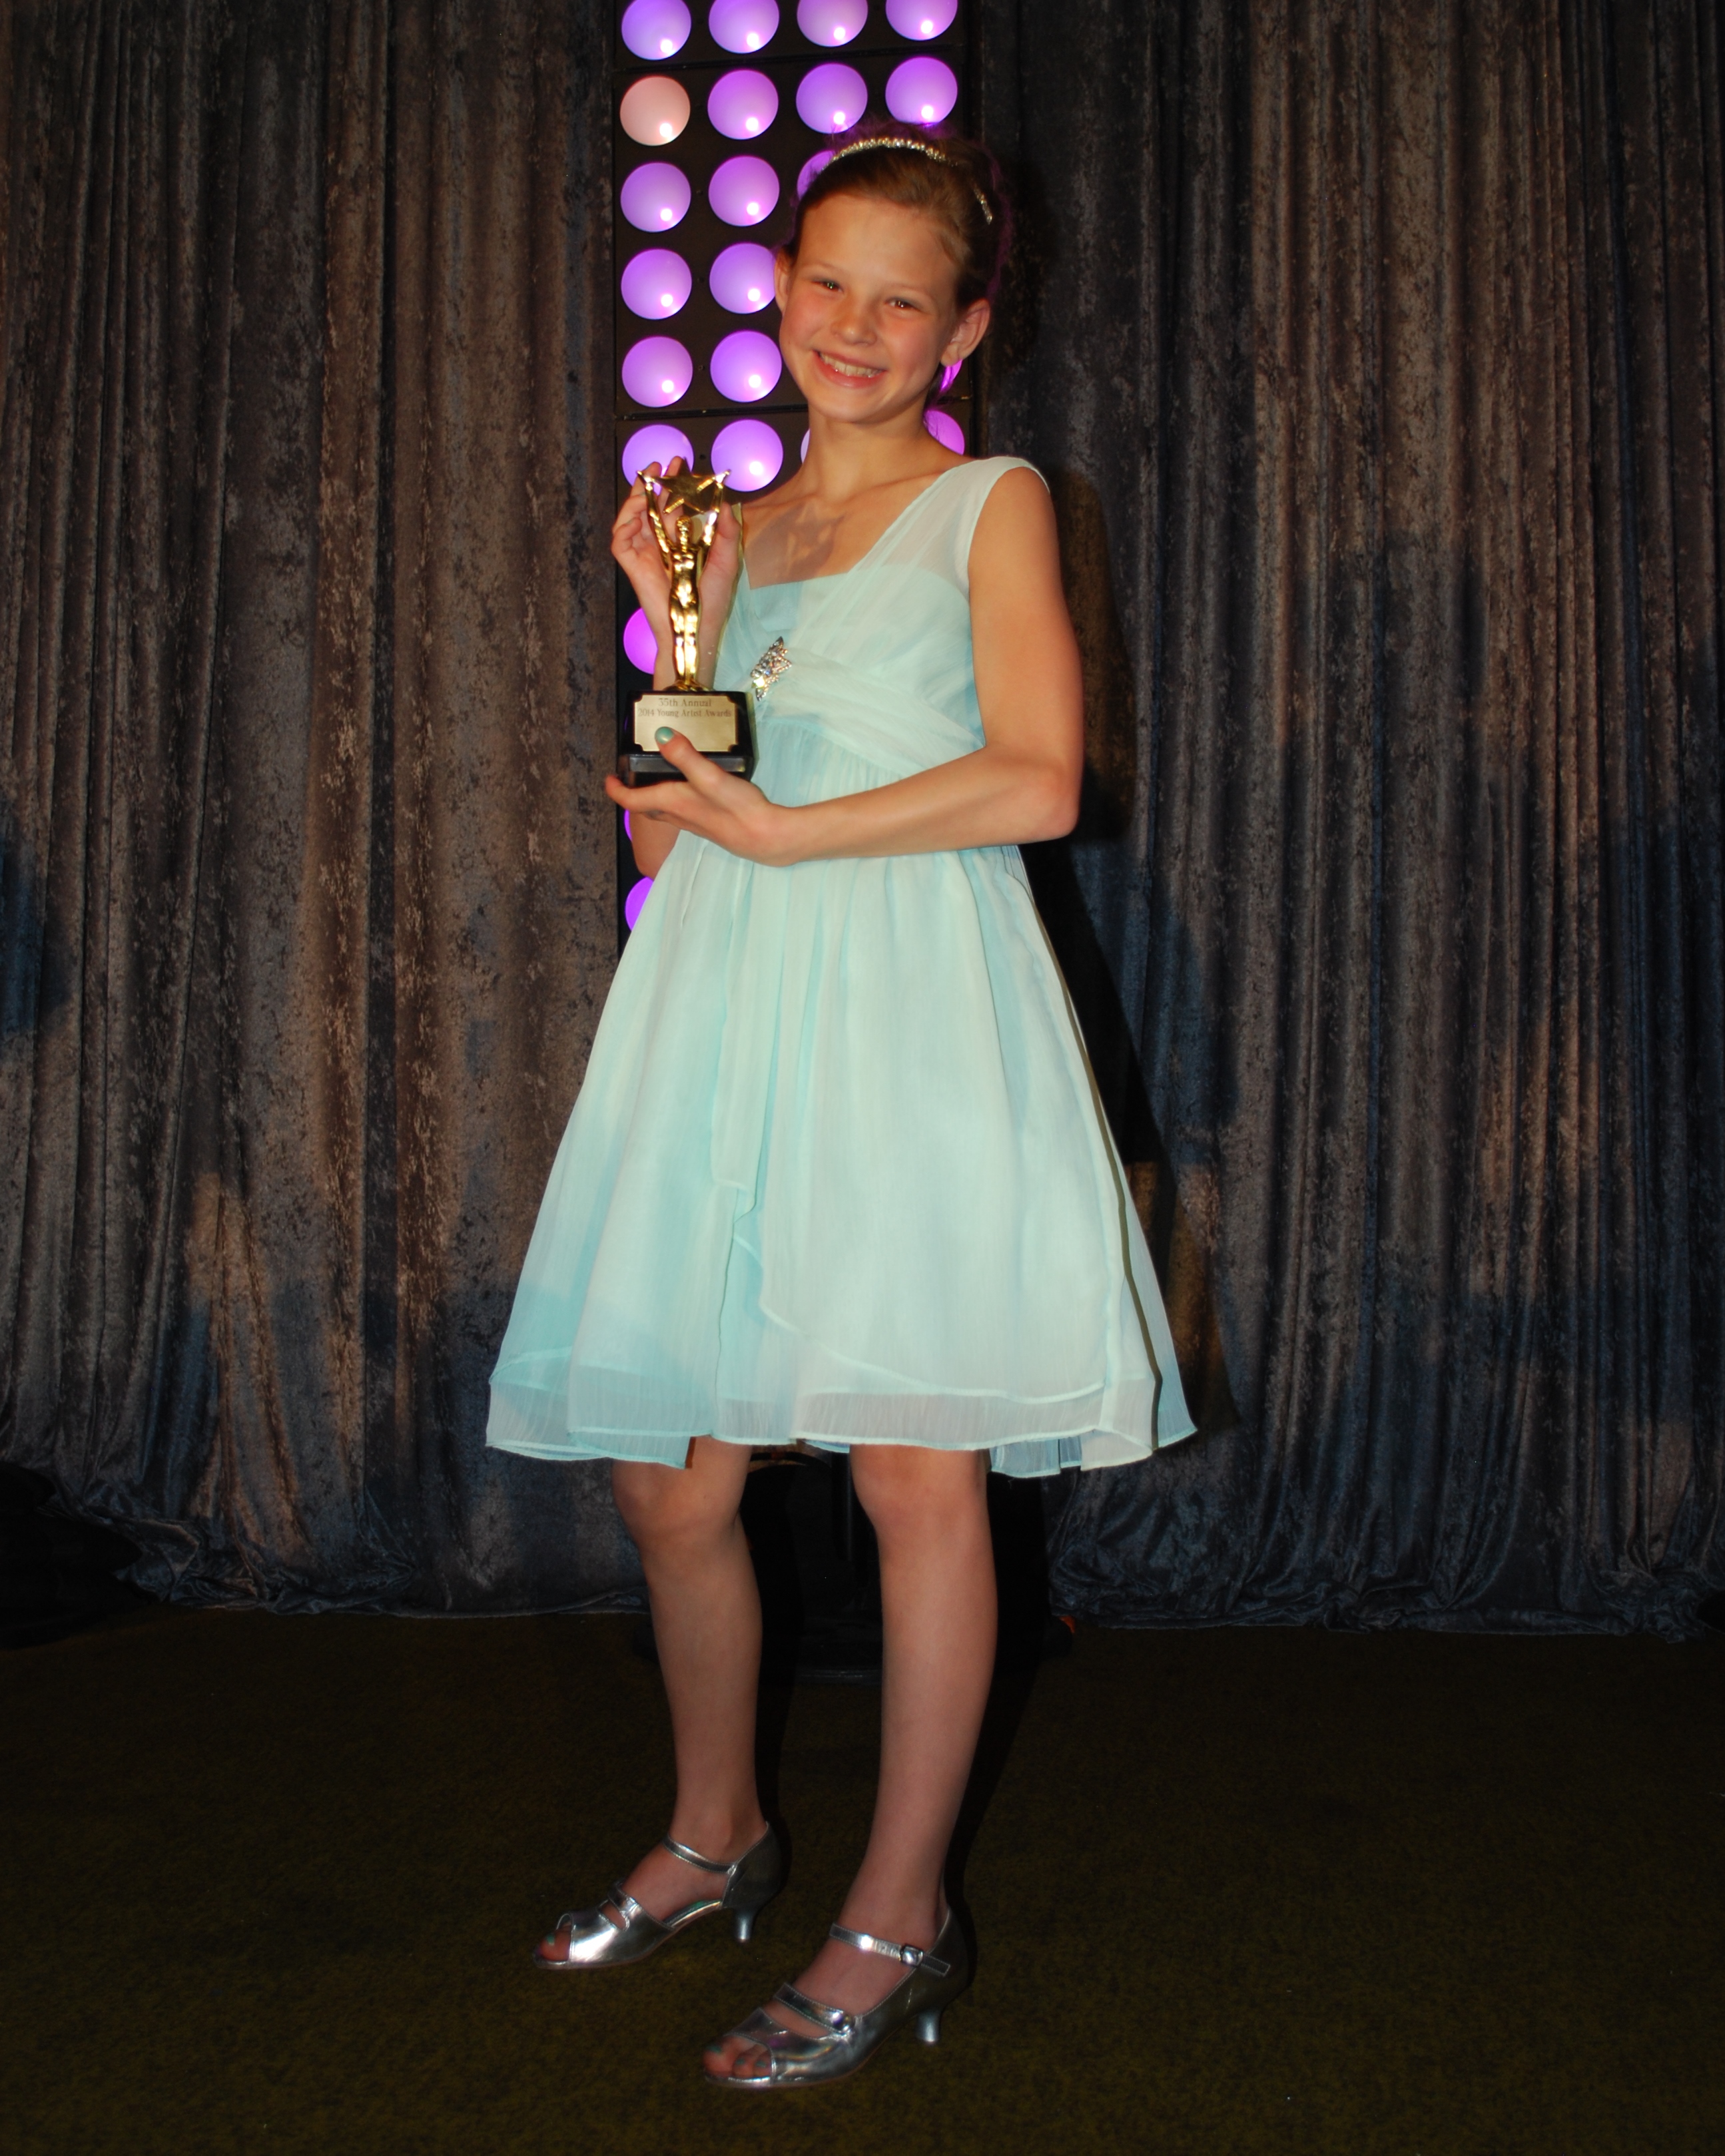 Peyton Kennedy at the 35th Annual Young Artist Awards on May 4, 2014, winner of Best Actress in a Short Film.